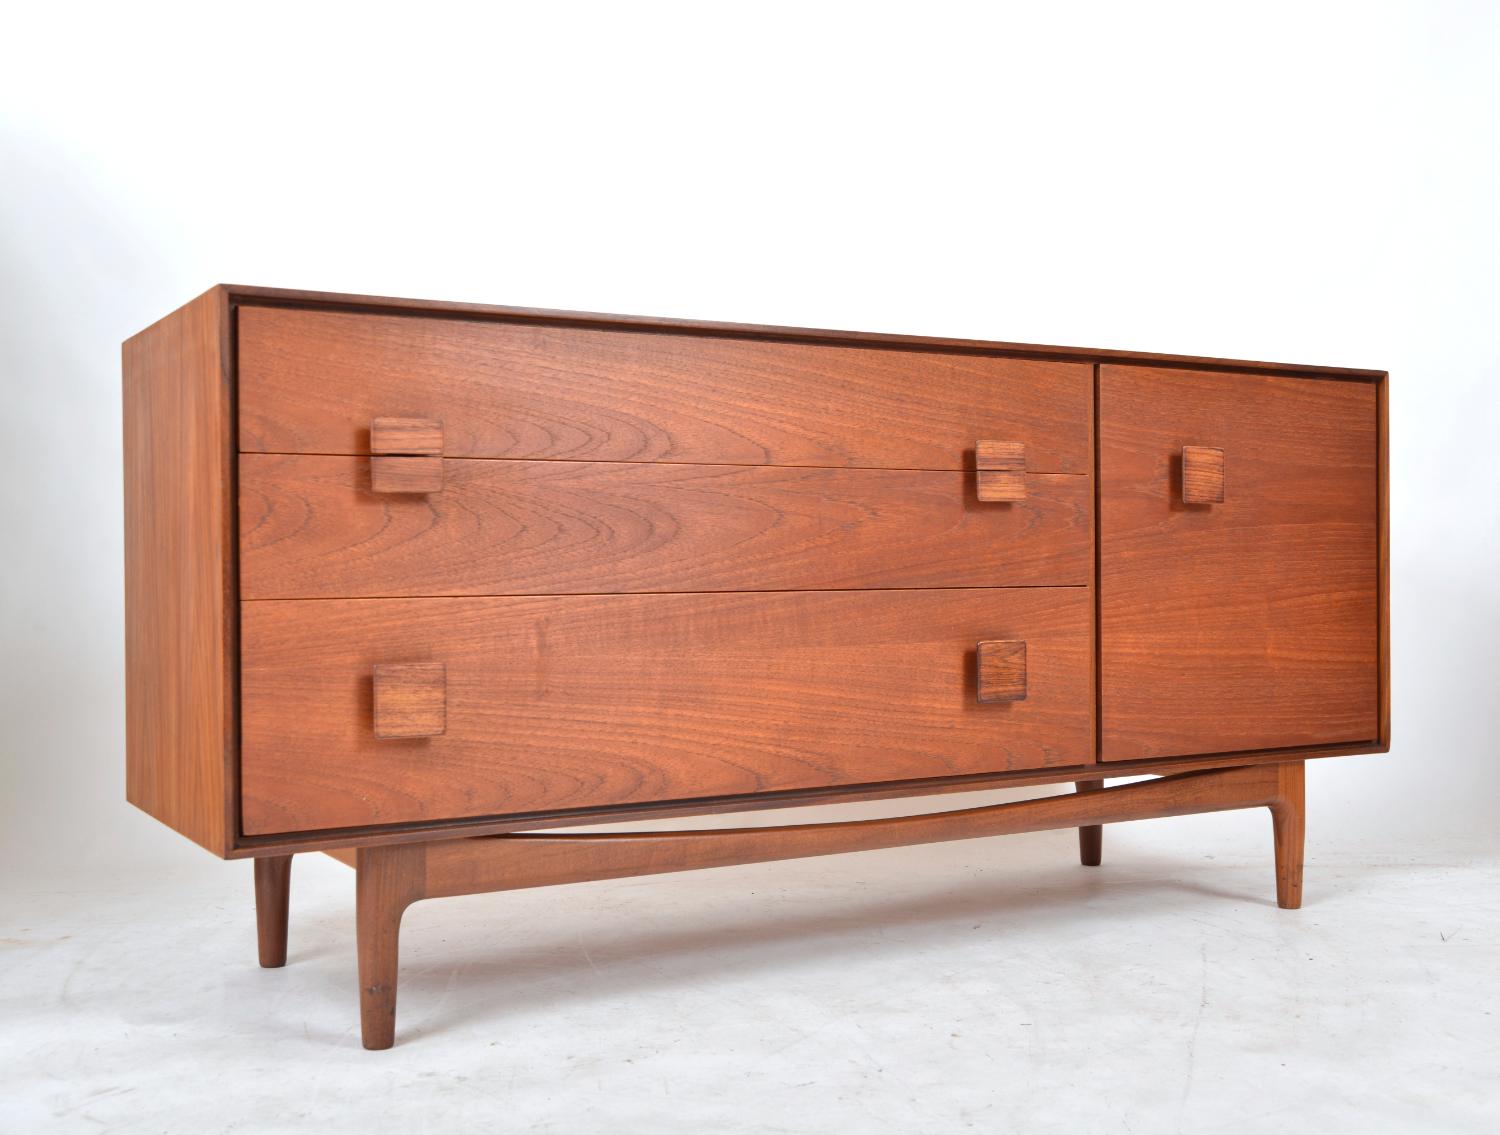 A stunning and rarely seen 1960s teak sideboard designed by the famous Danish designer Ib Kofod Larsen for G-Plan. The smallest of the sideboards he designed for G-Plan, but still featuring all of his stylish design touches synonymous with his